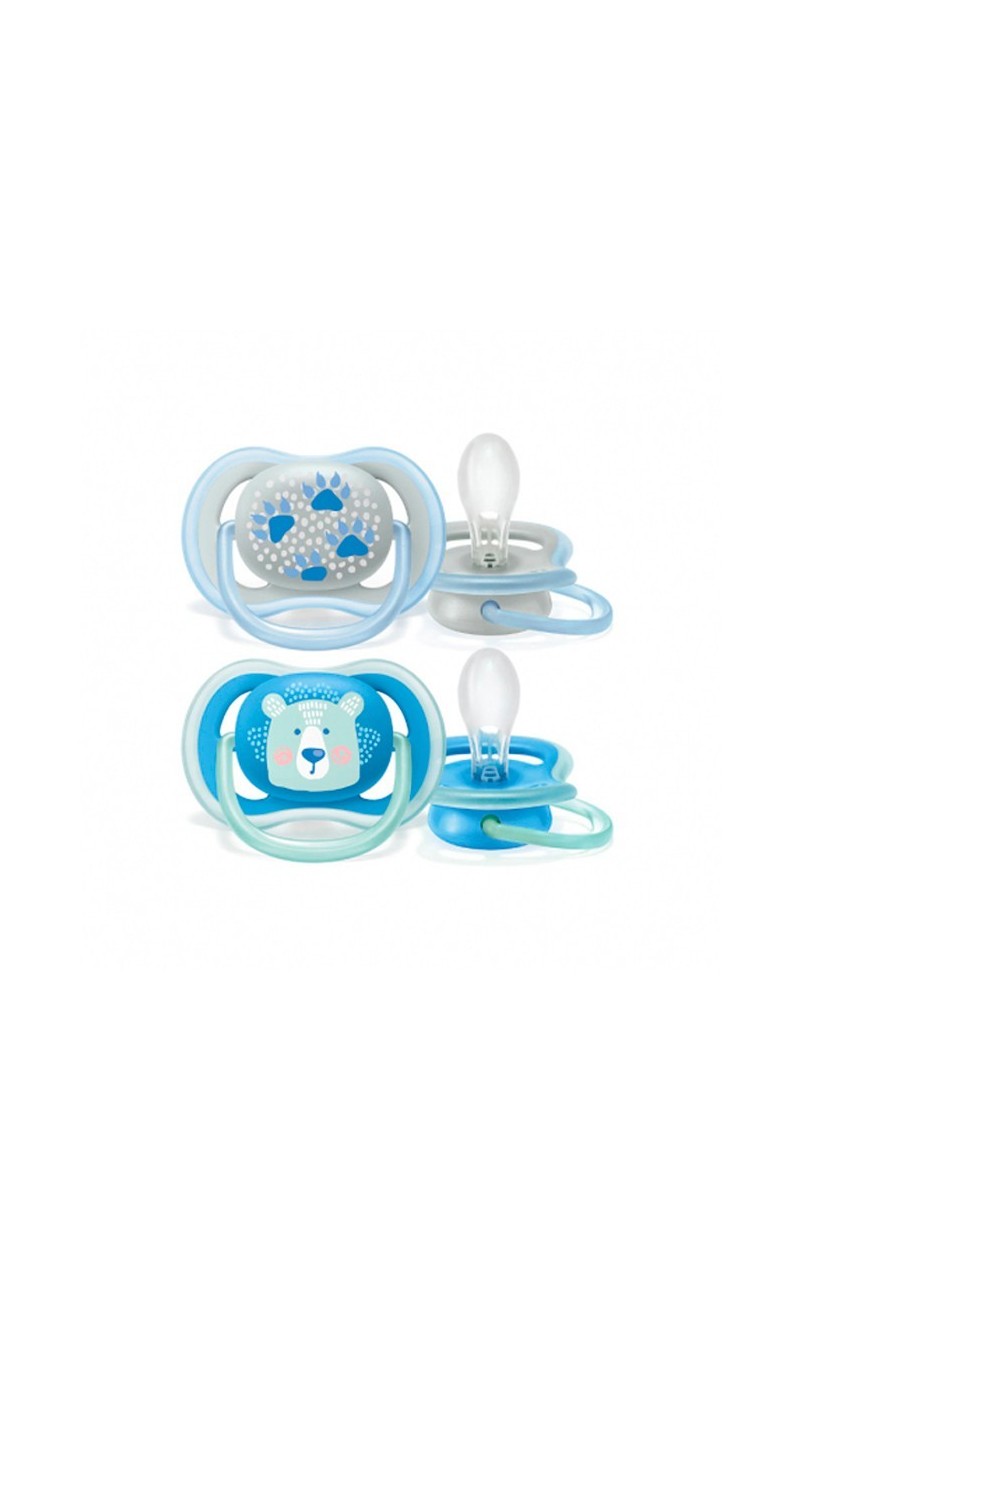 Avent Infant Ultra Happy Pacifier 6-18 Months 2U